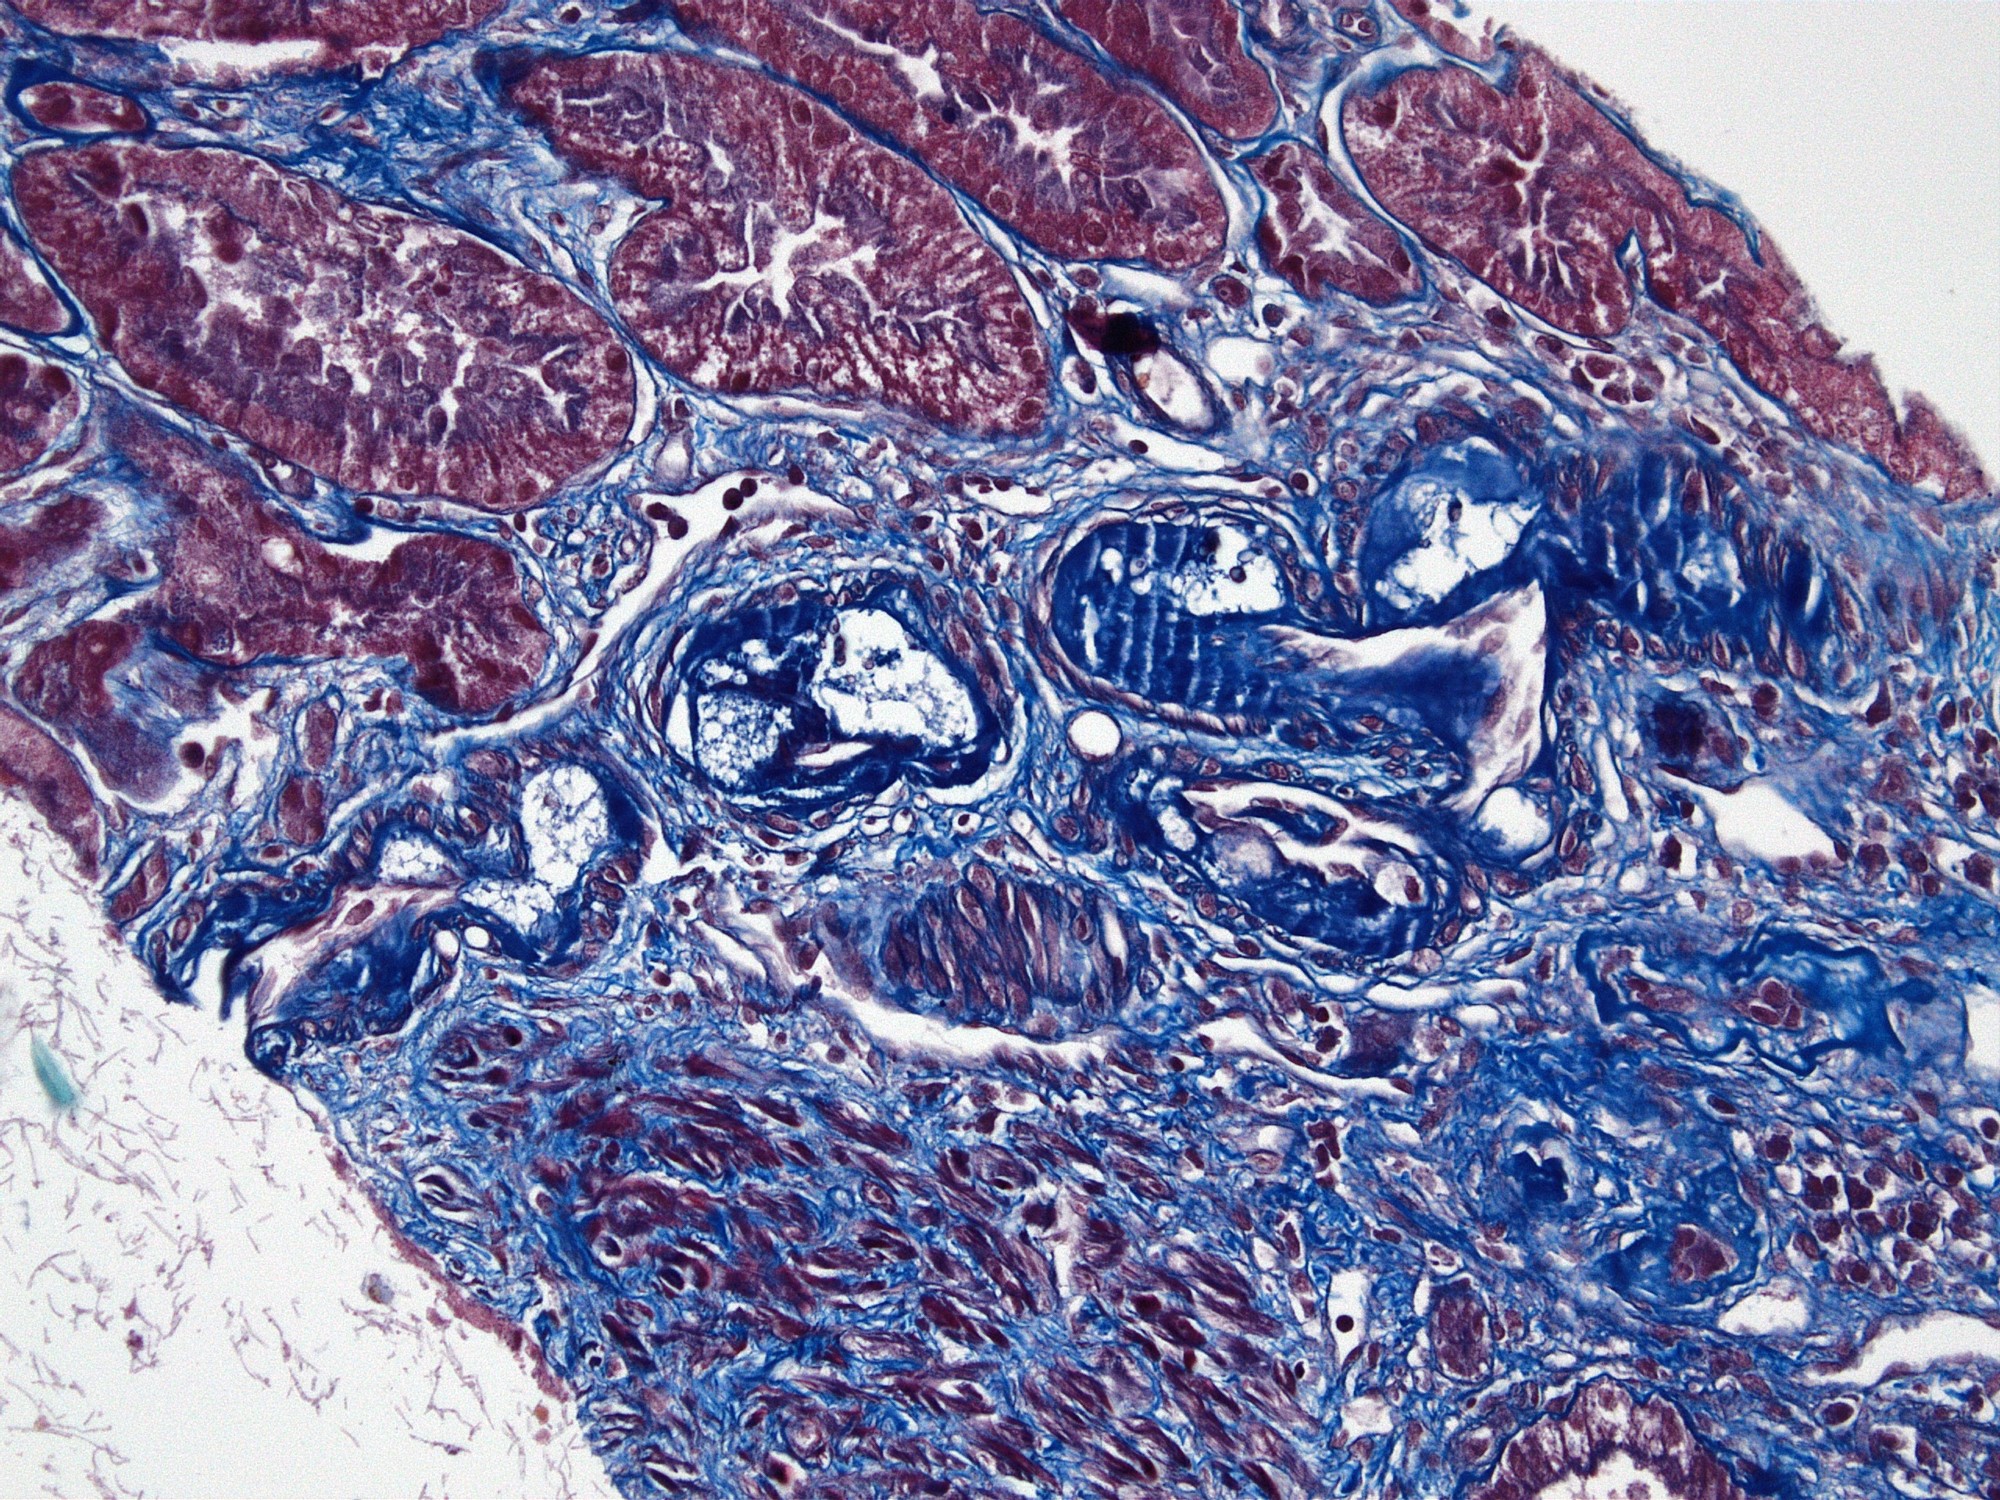 Intimal foam cells and fibrosis in small artery, MTC